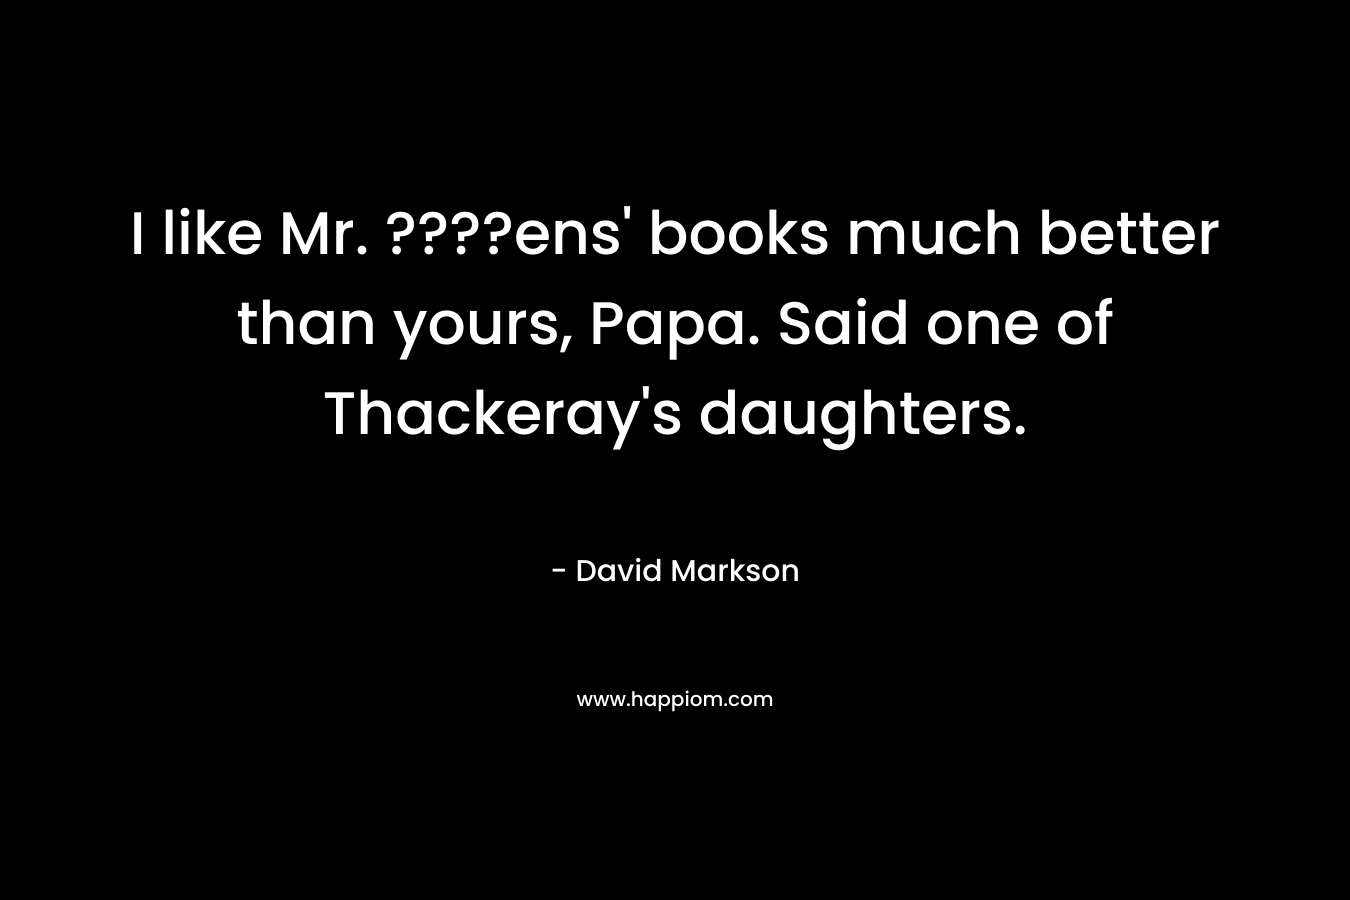 I like Mr. ????ens’ books much better than yours, Papa. Said one of Thackeray’s daughters. – David Markson